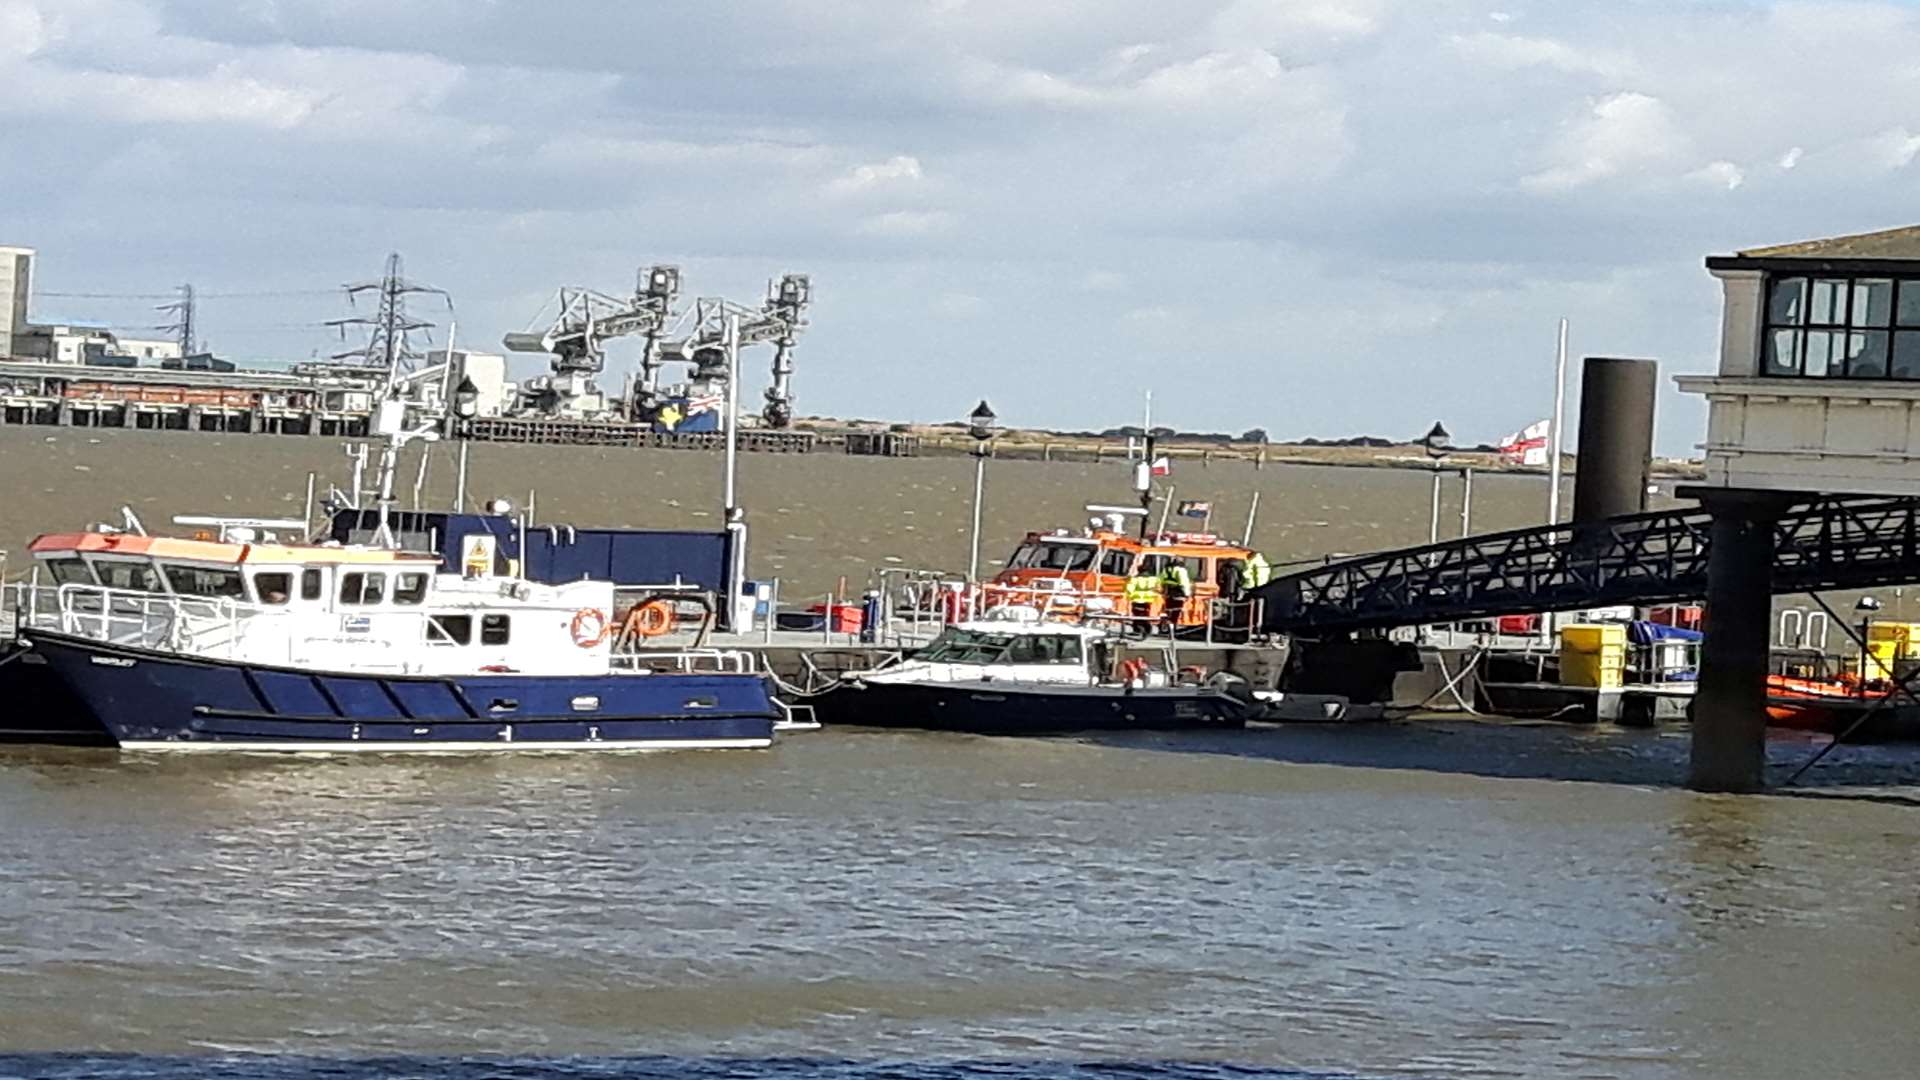 Emergency services were called to the Port of London Authority